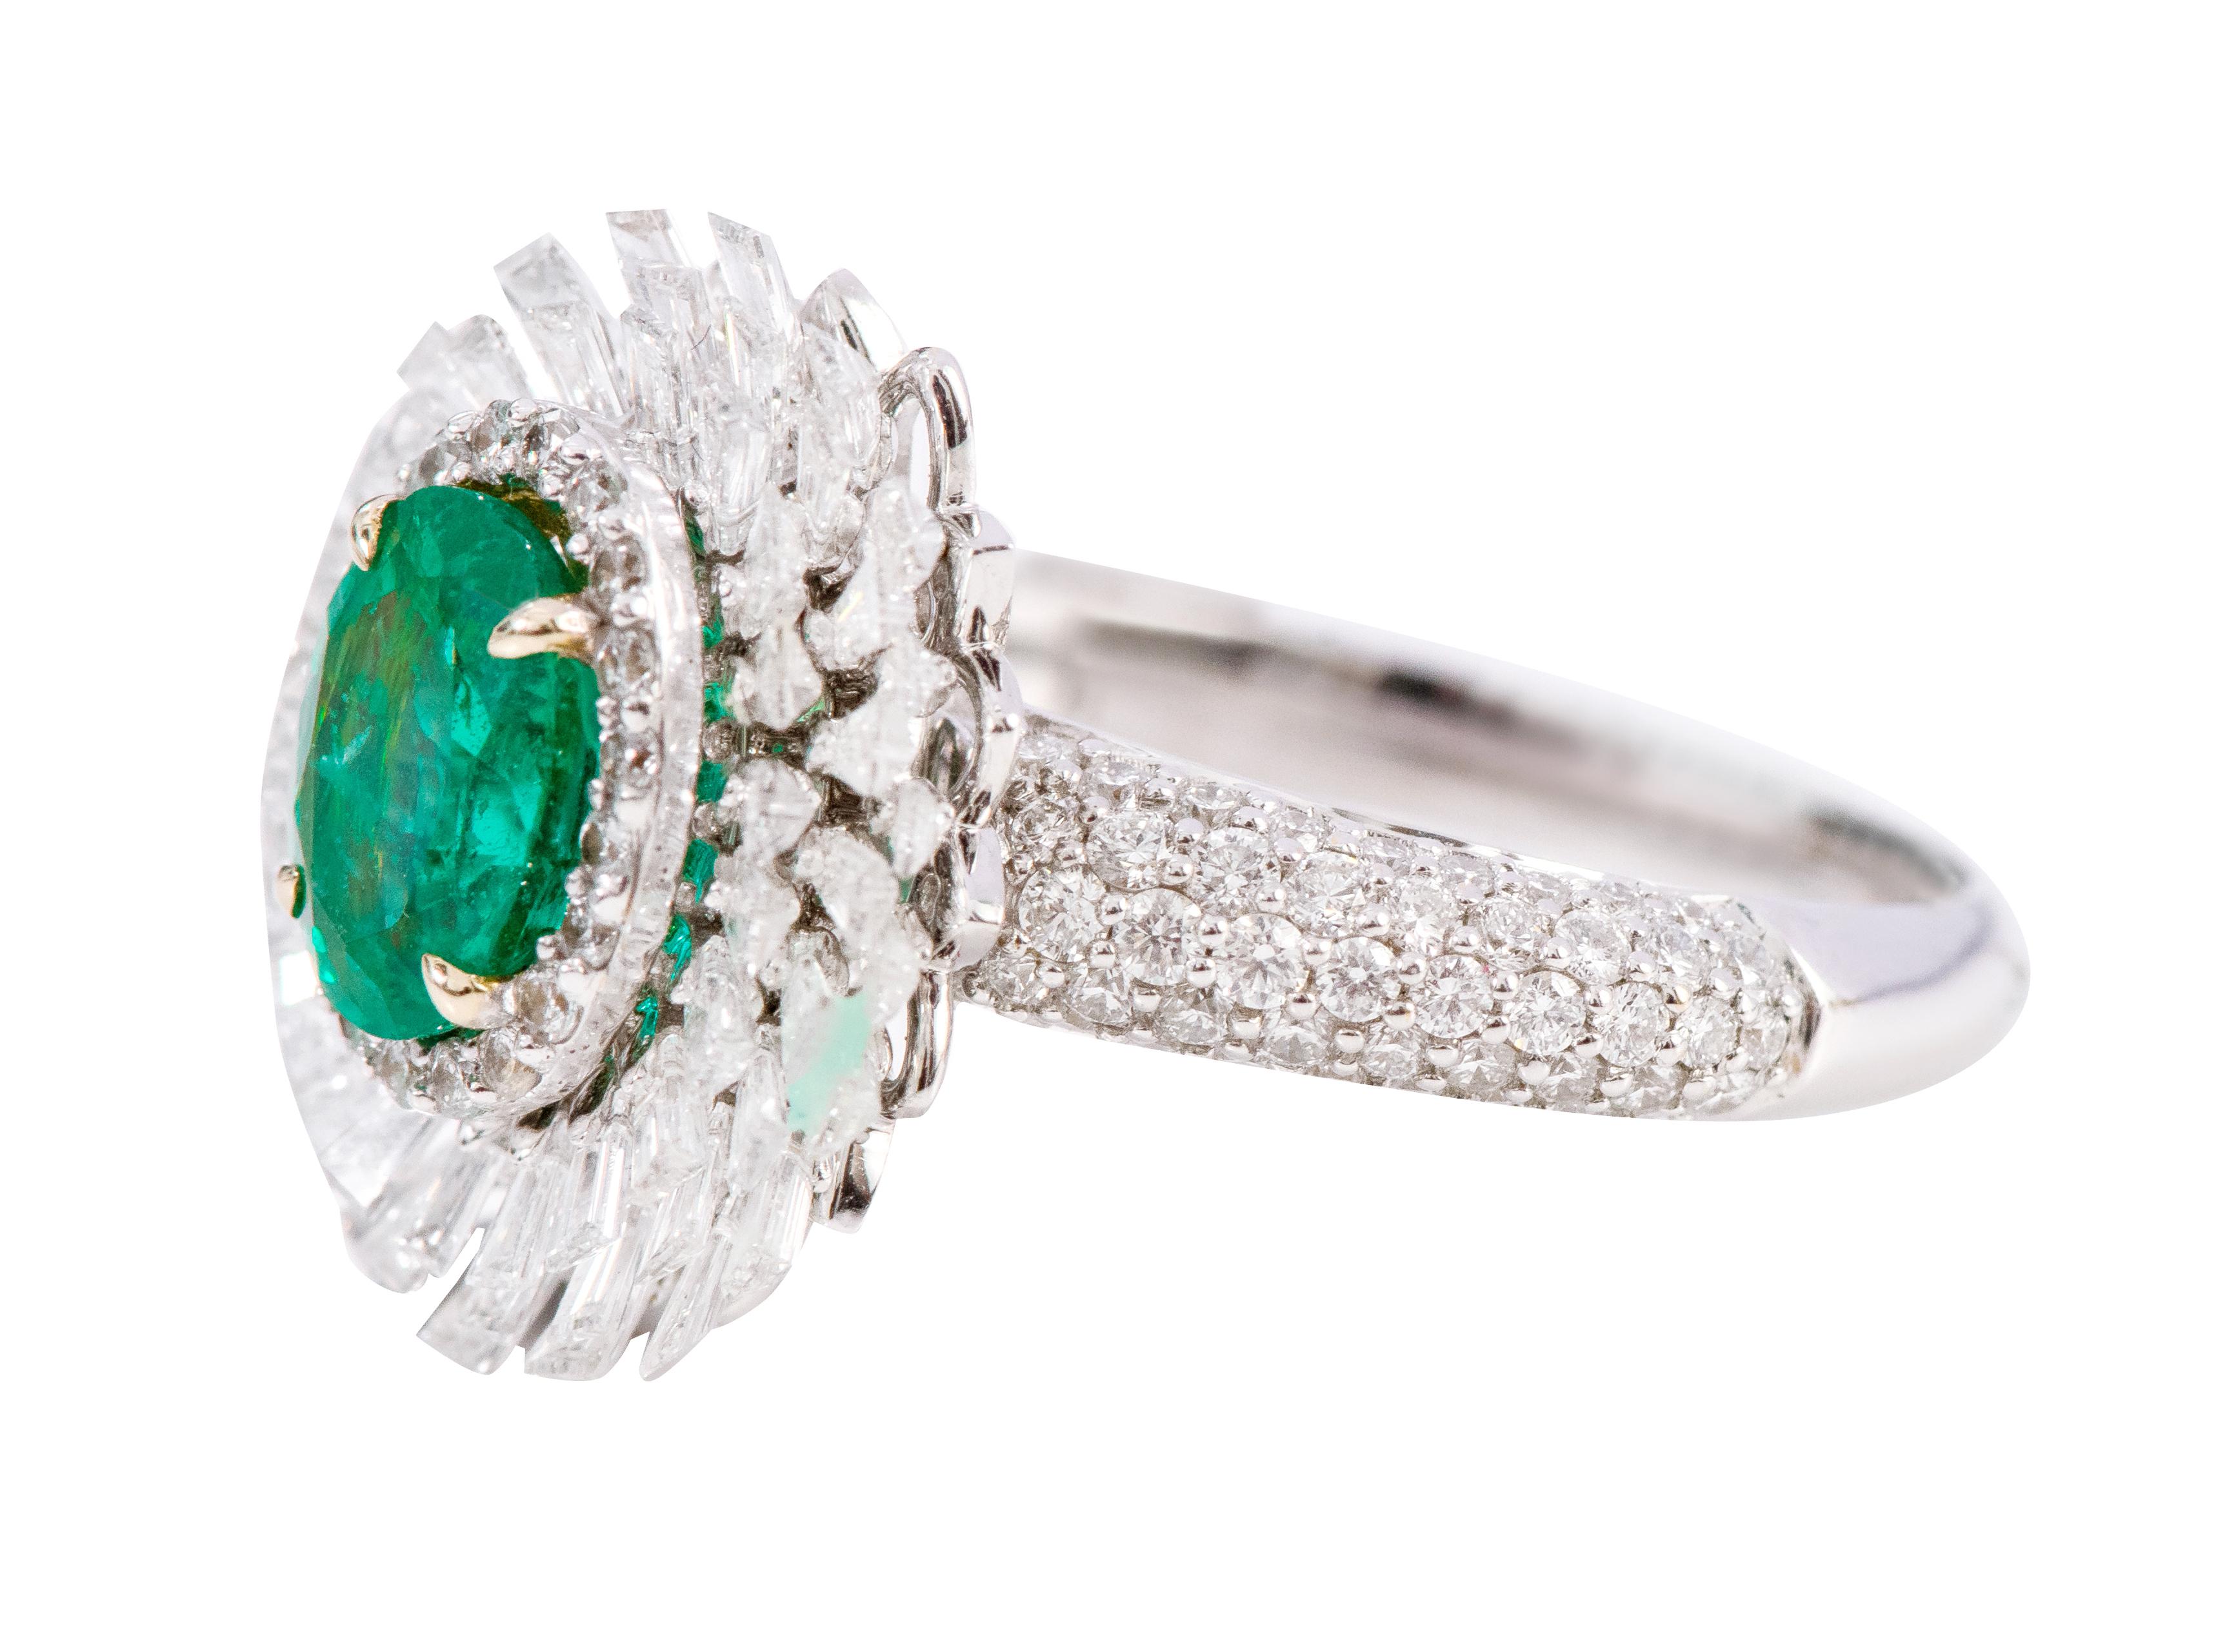 18 Karat White Gold 1.15 Carat Natural Emerald and Diamond Cluster Statement Ring

This impressive cocktail vivid green emerald and diamond ring is prolific. The ring sets itself apart with the exquisite oval emerald solitaire surrounded first by a